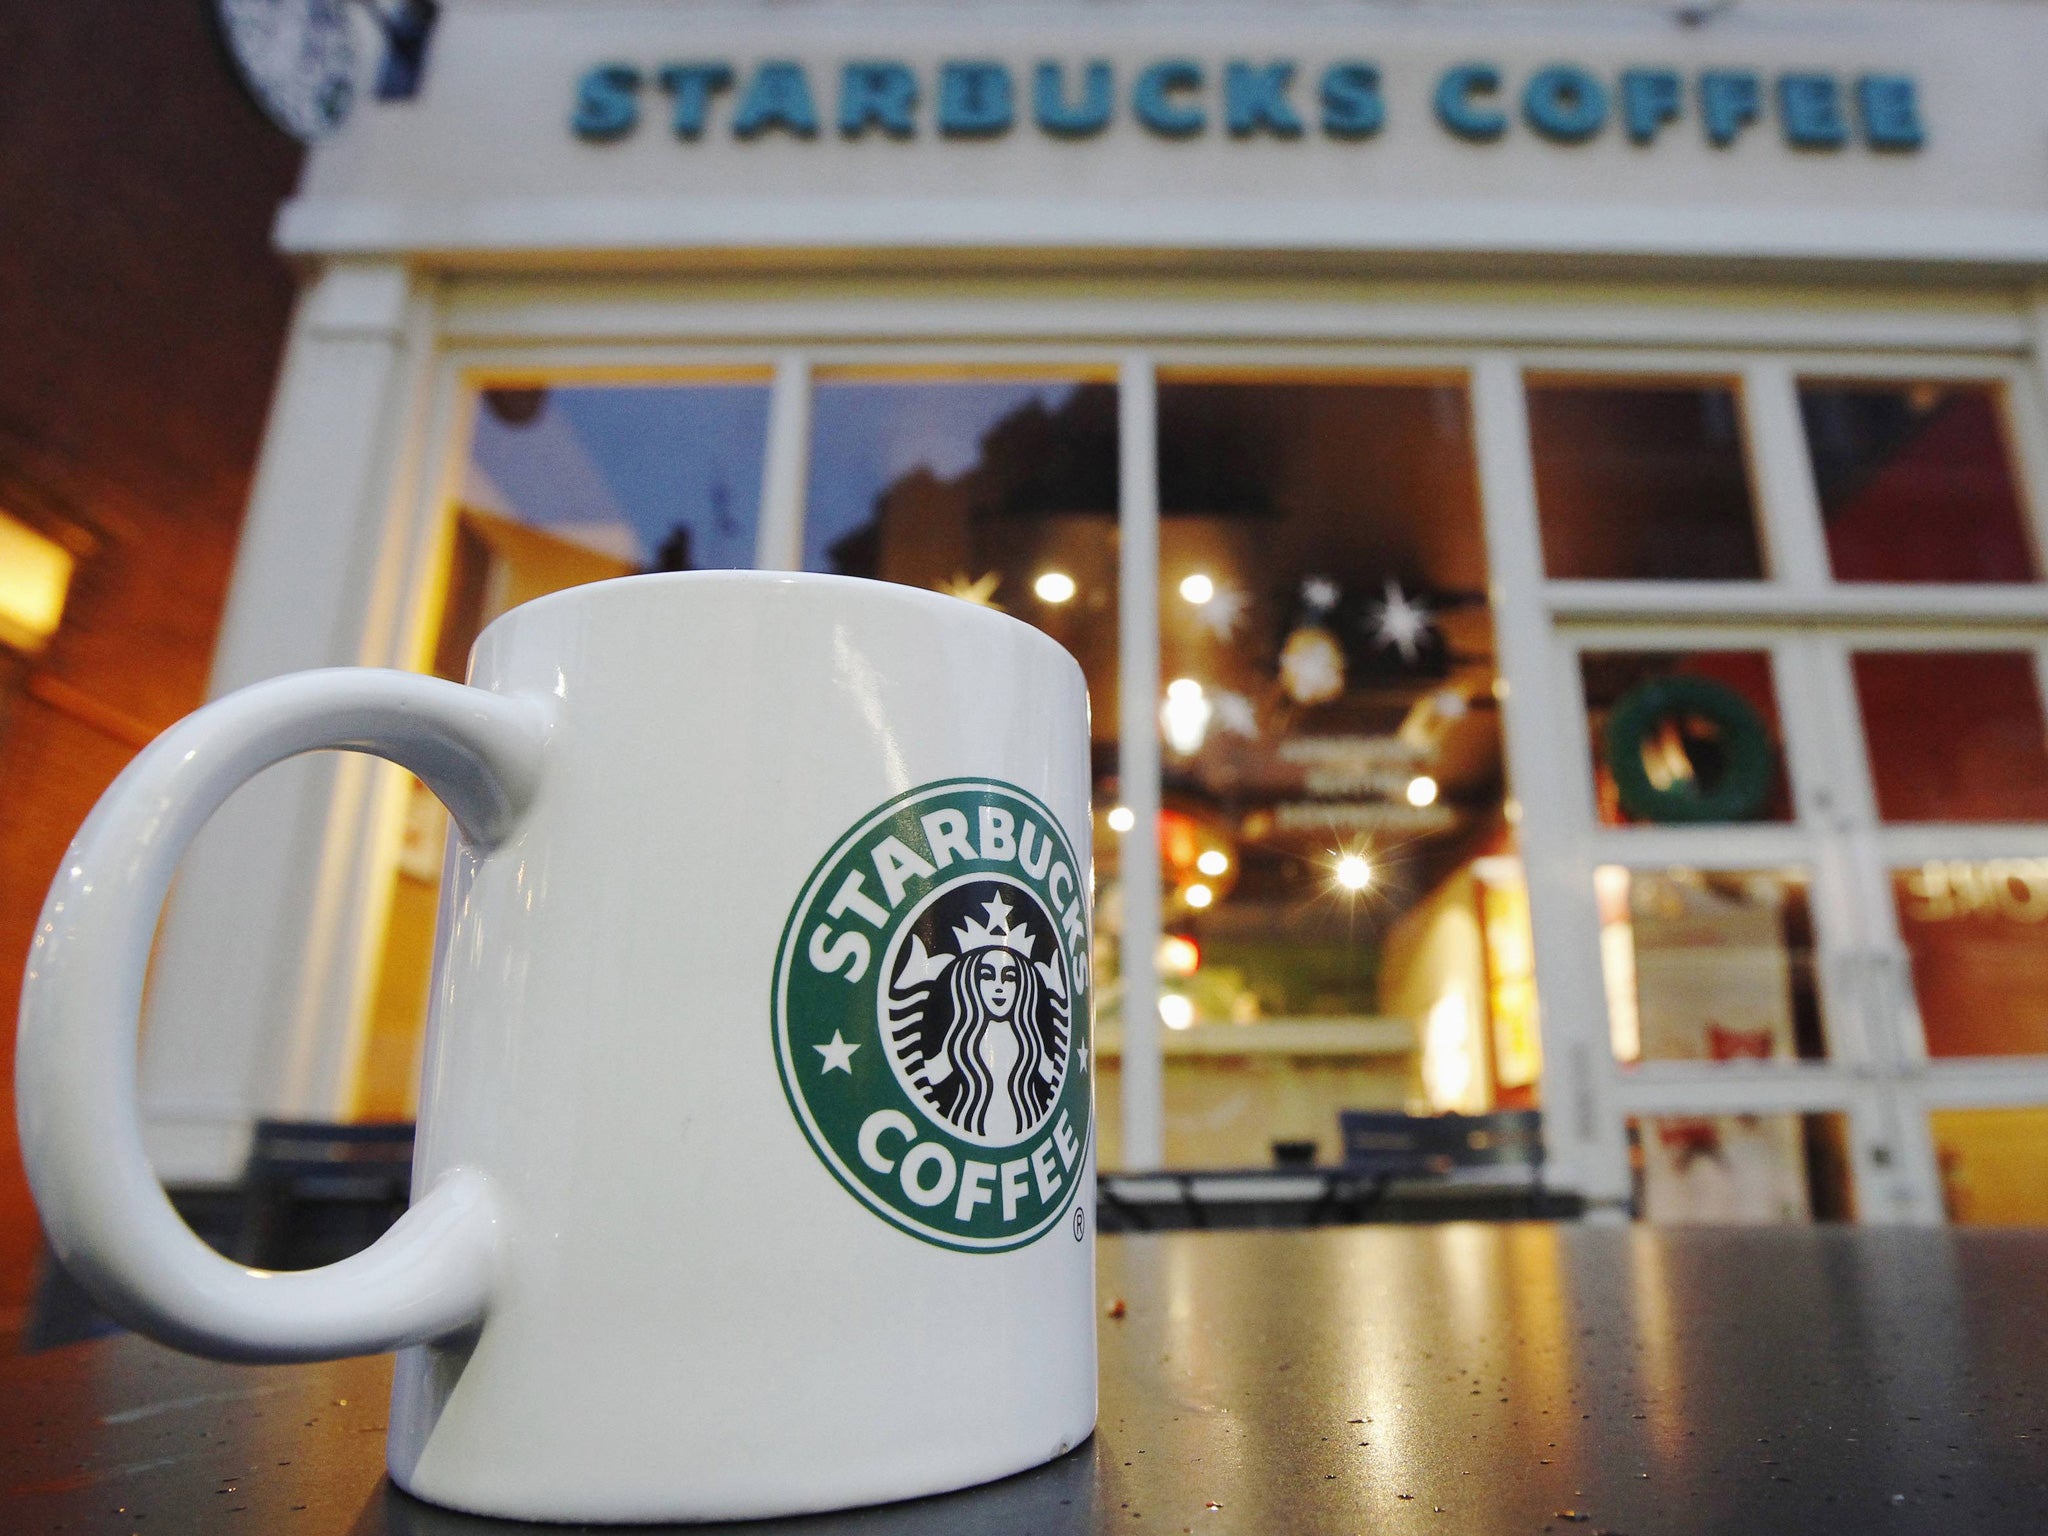 Starbucks UK managing director Kris Engskov told the London Chamber of Commerce that changes to its tax arrangements will see the firm pay above what is required by law